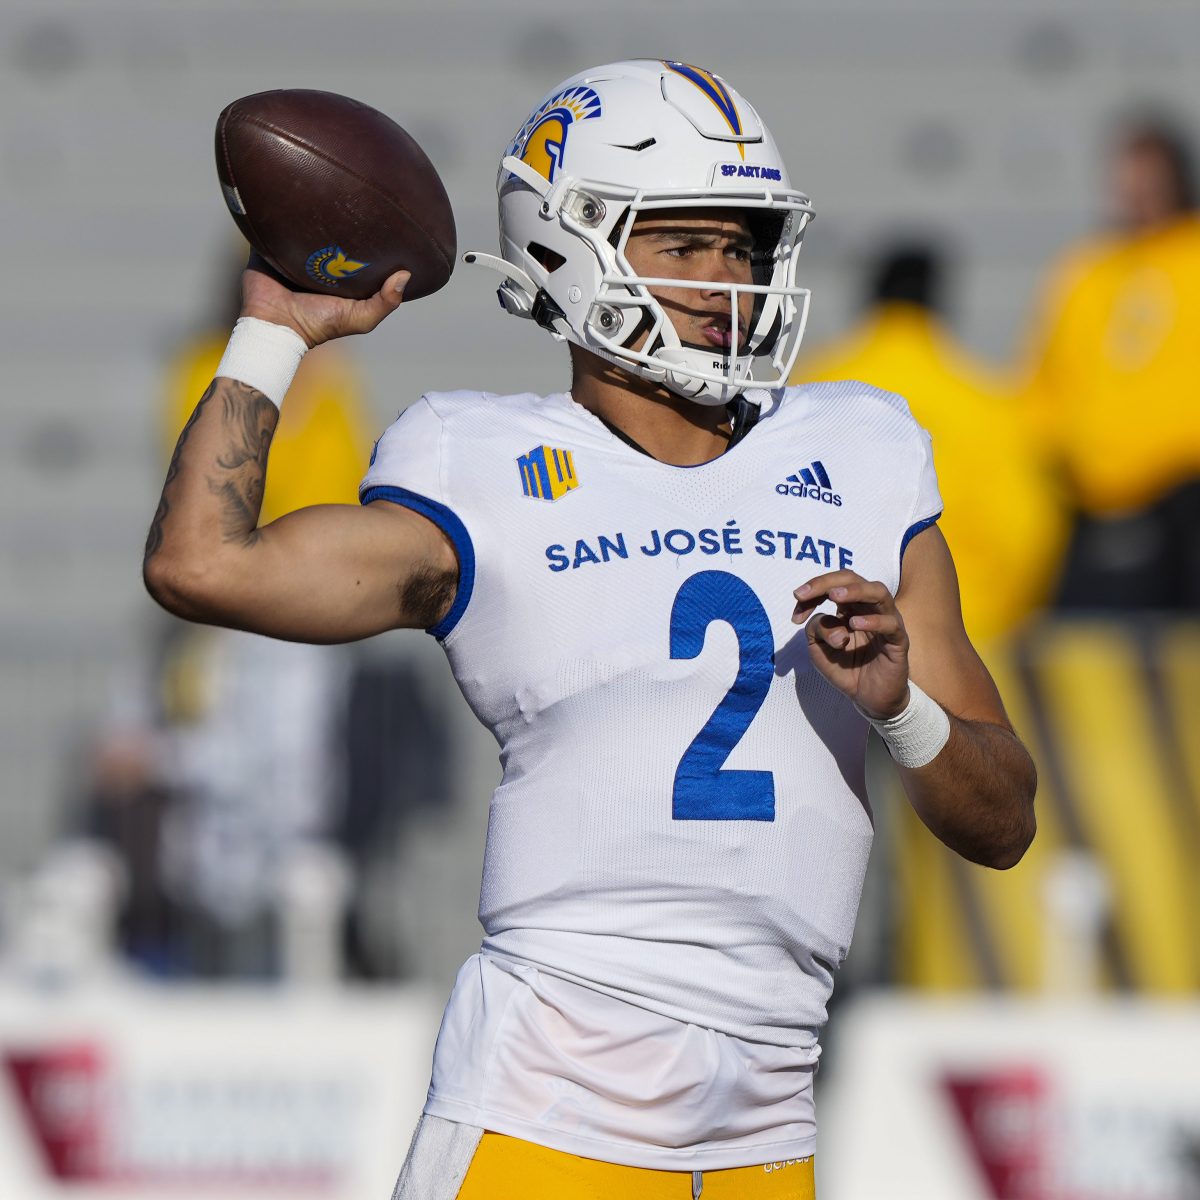 Eastern Michigan (EMU) vs. San Jose State Prediction, Preview, and Odds – 12-20-2022